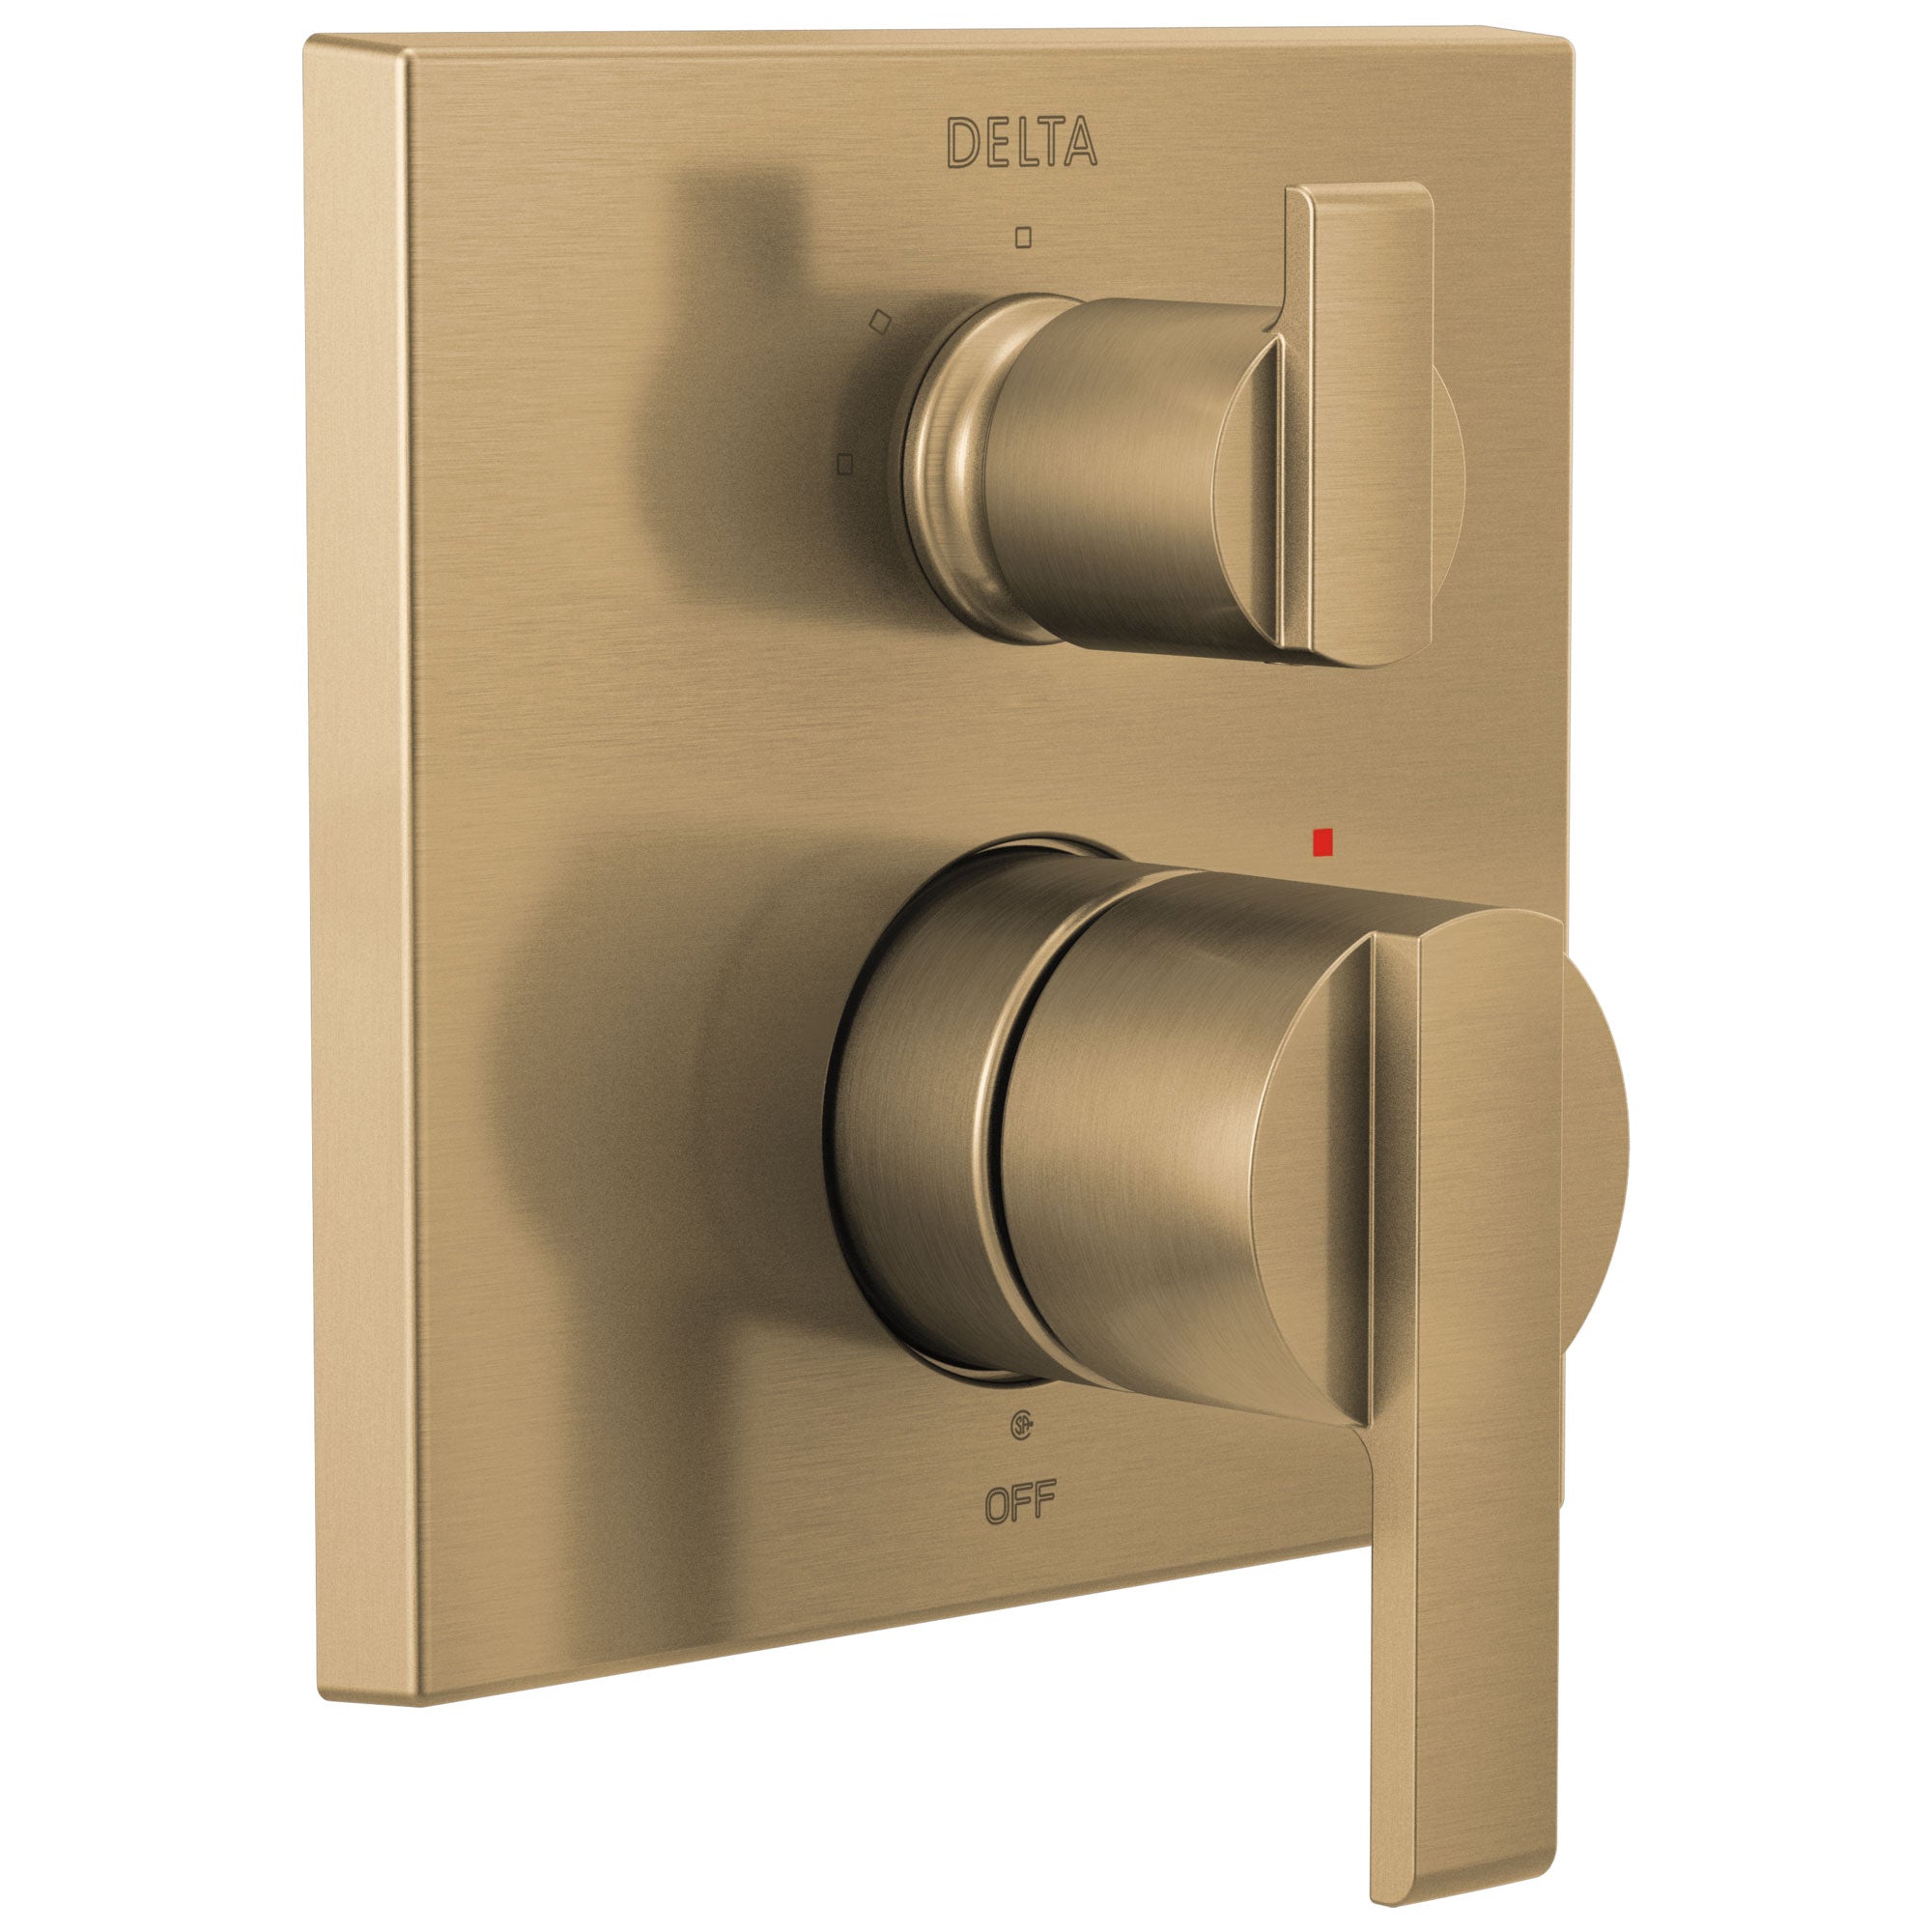 Delta Ara Champagne Bronze Finish Angular Modern Monitor 14 Series Shower Control Trim Kit with 3-Setting Integrated Diverter (Requires Valve) DT24867CZ